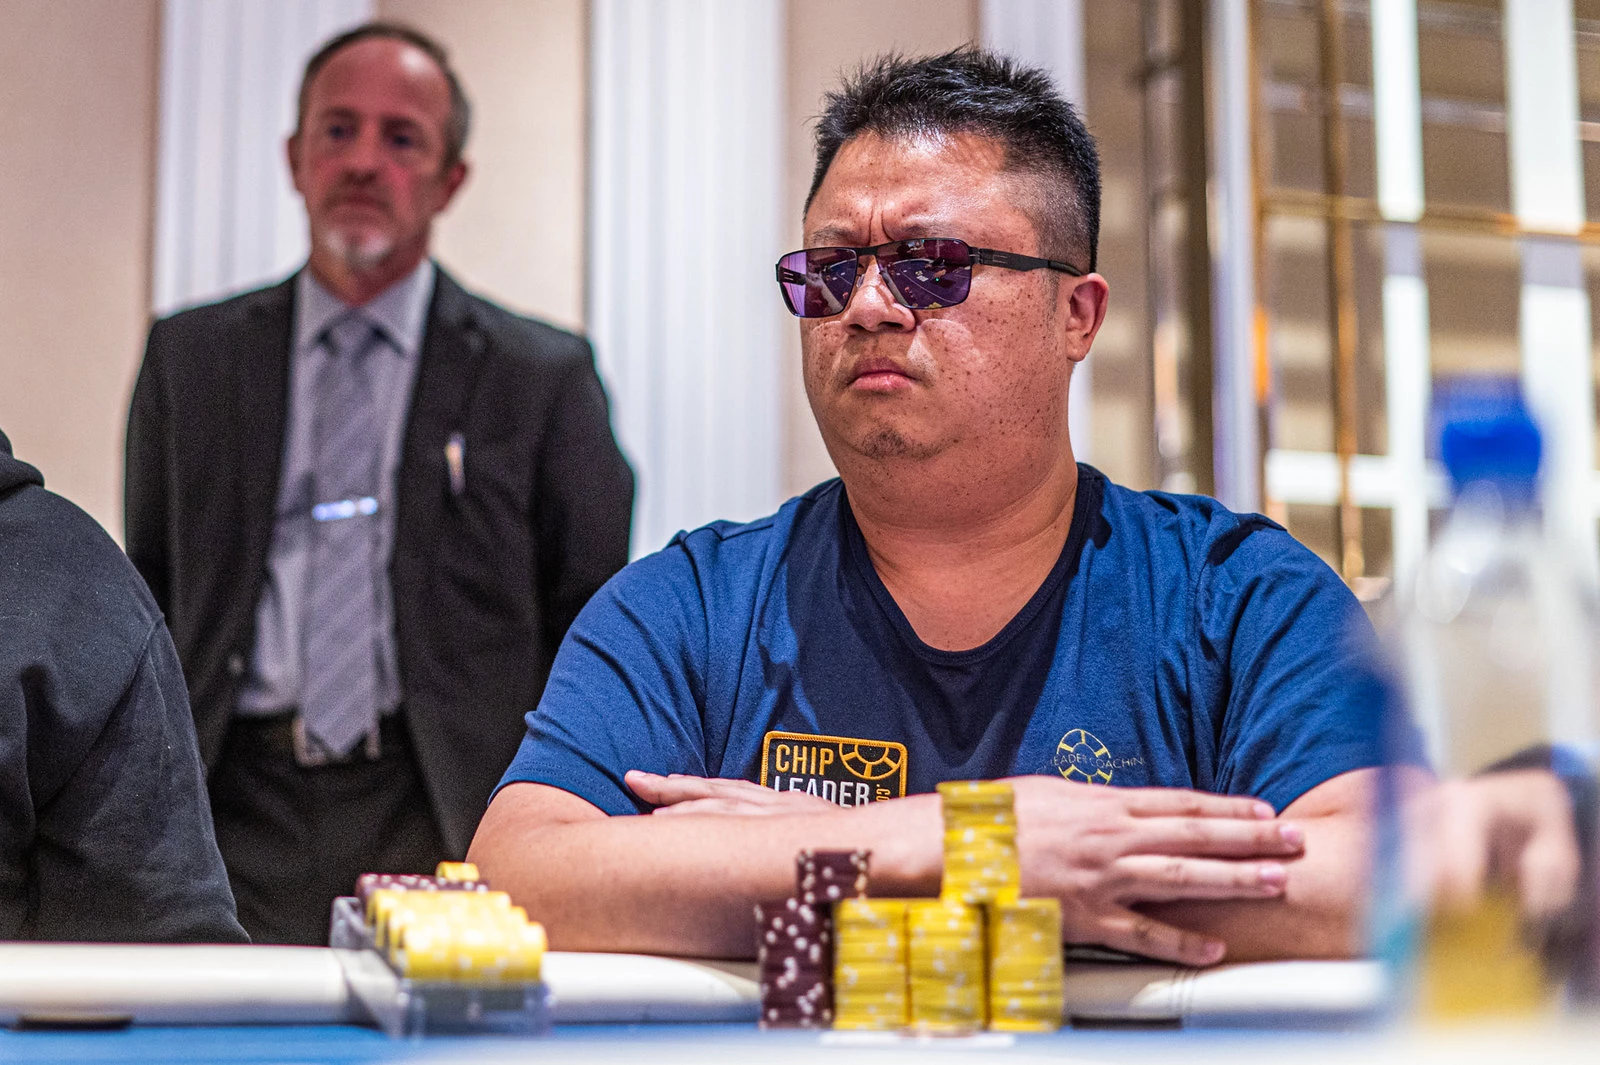 Bin Weng Emerges as Star Amidst Poker Titans, Leading His Third Straight WPT Final Table